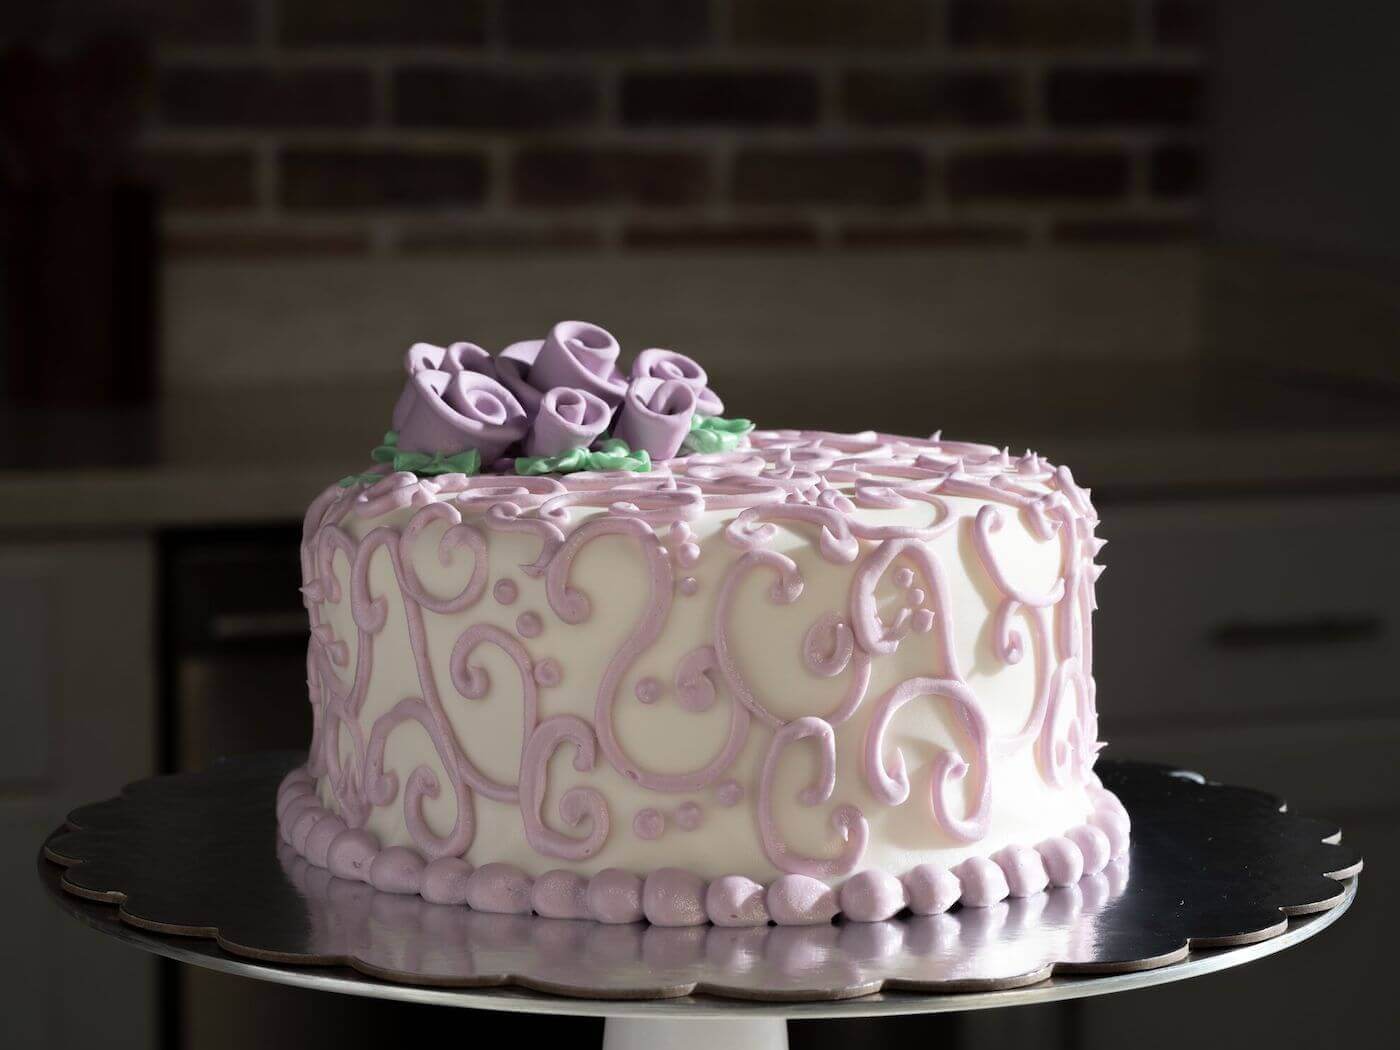 White cake decorated with purple details and flowers